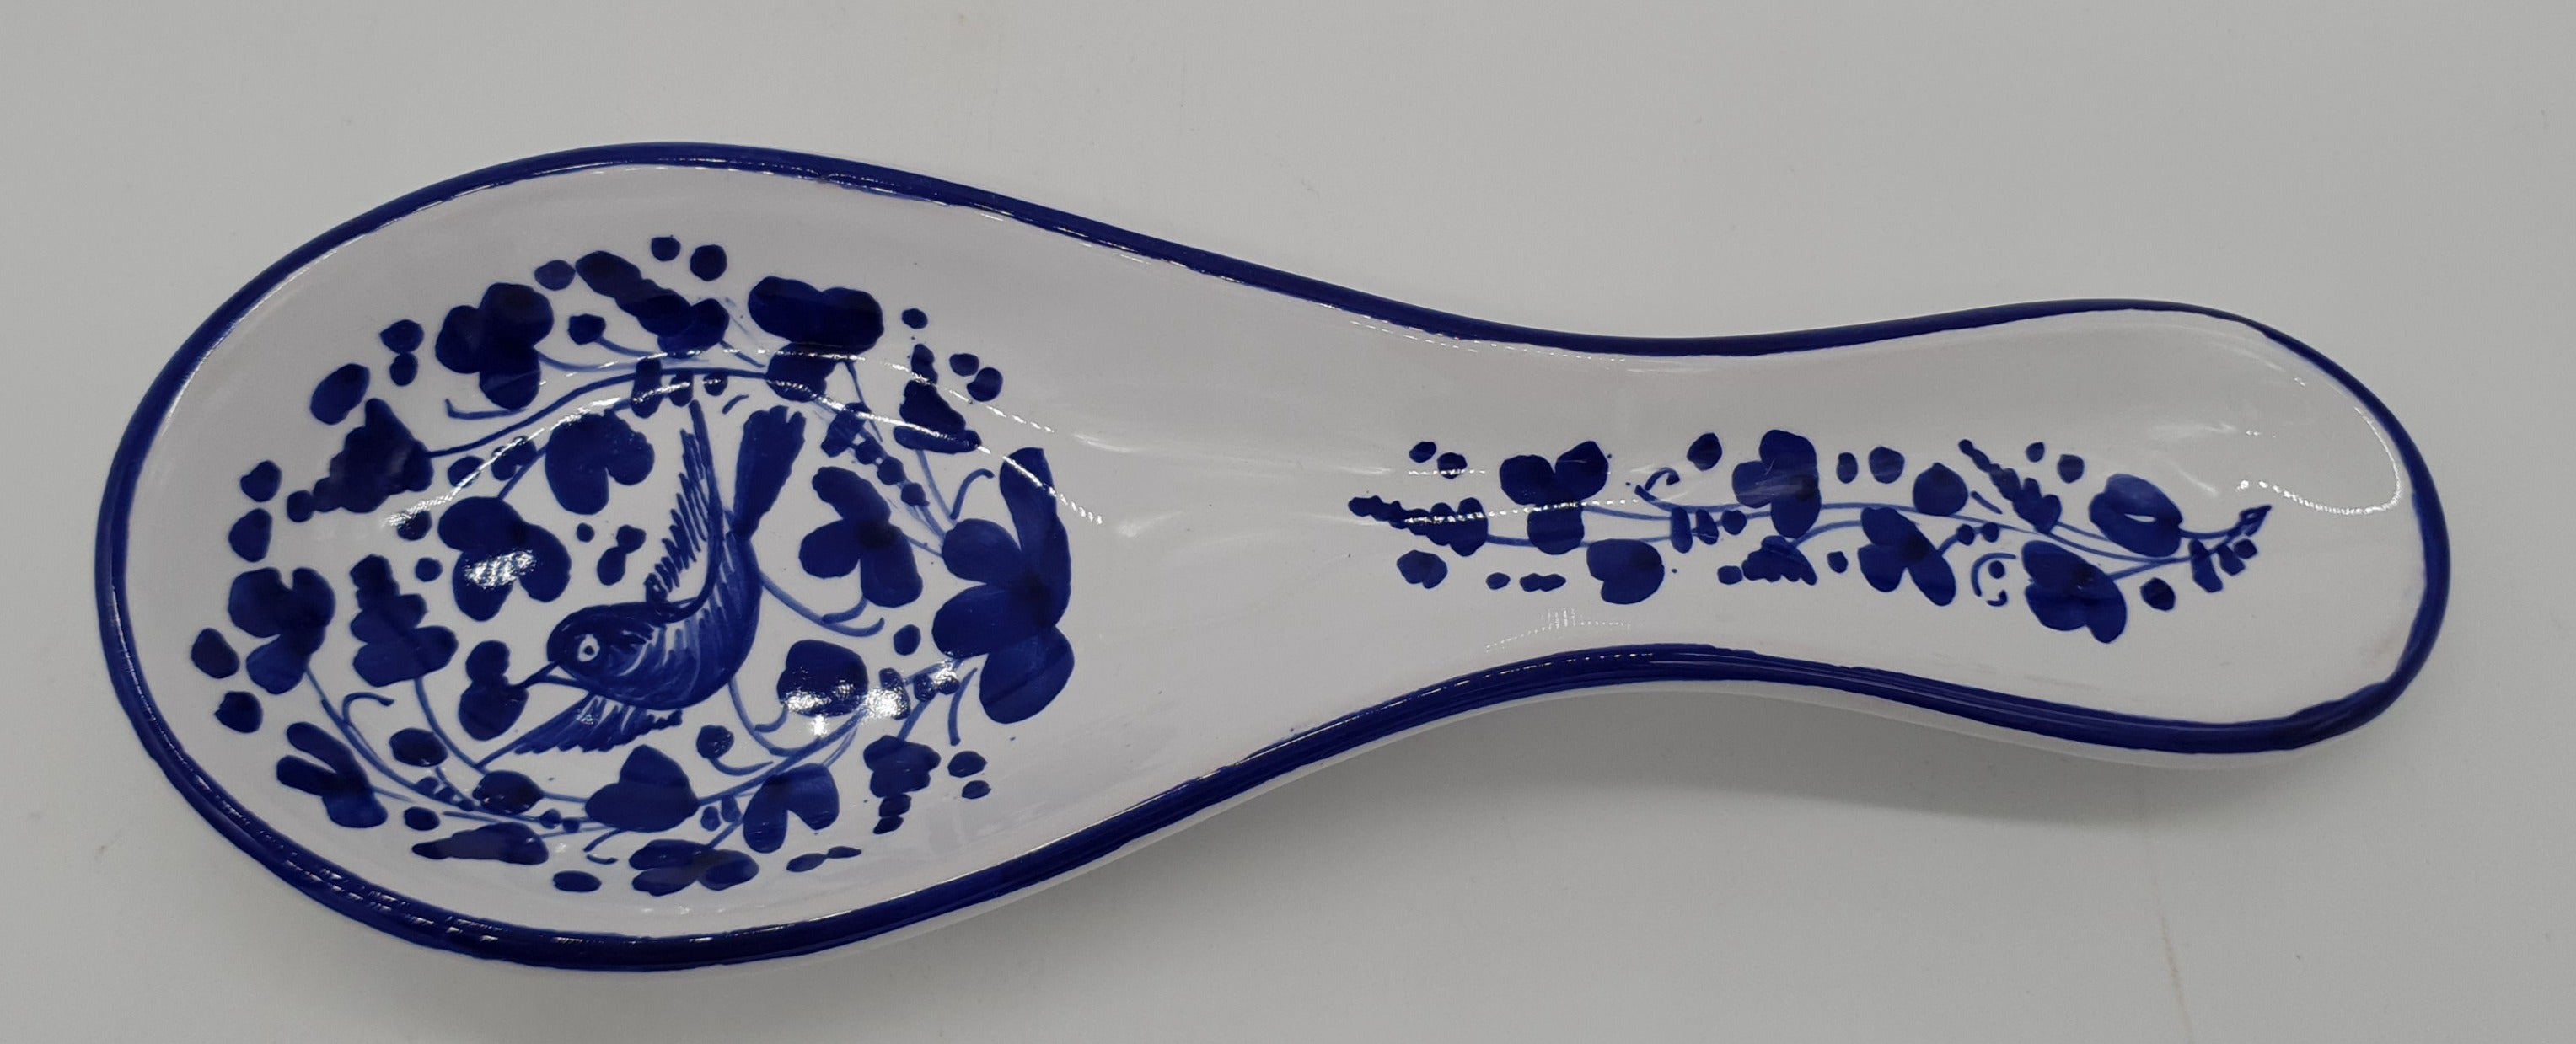 Ladle or spoon holder with blue arabesque decoration